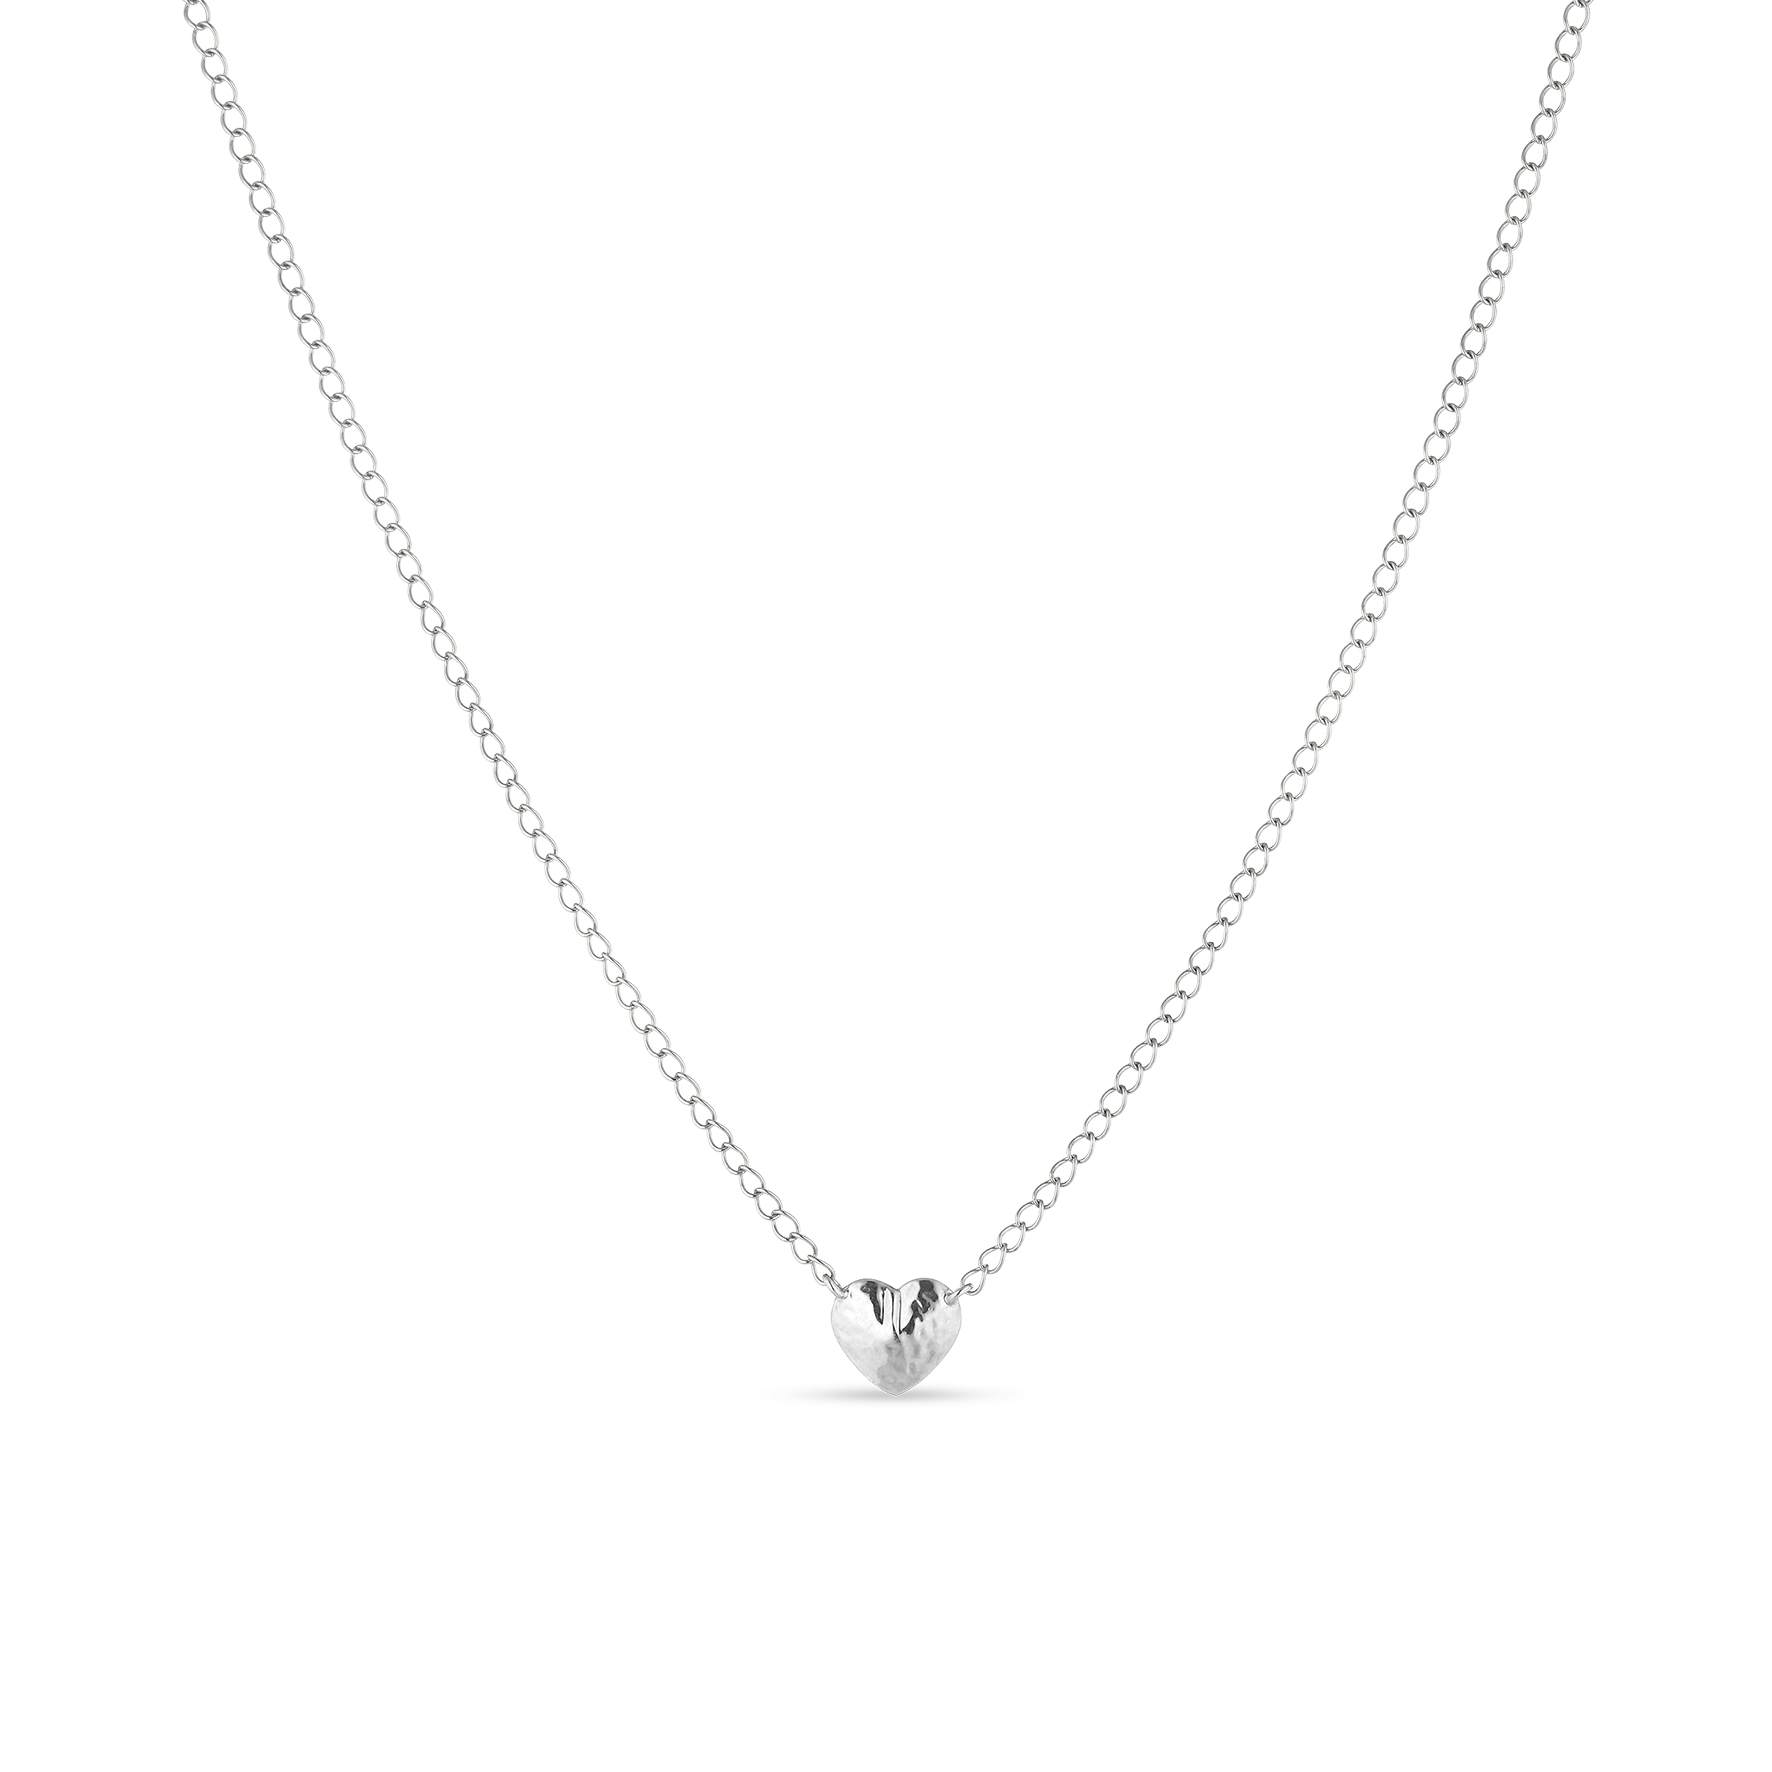 Bruised Heart Necklace from Jane Kønig in Silver Sterling 925